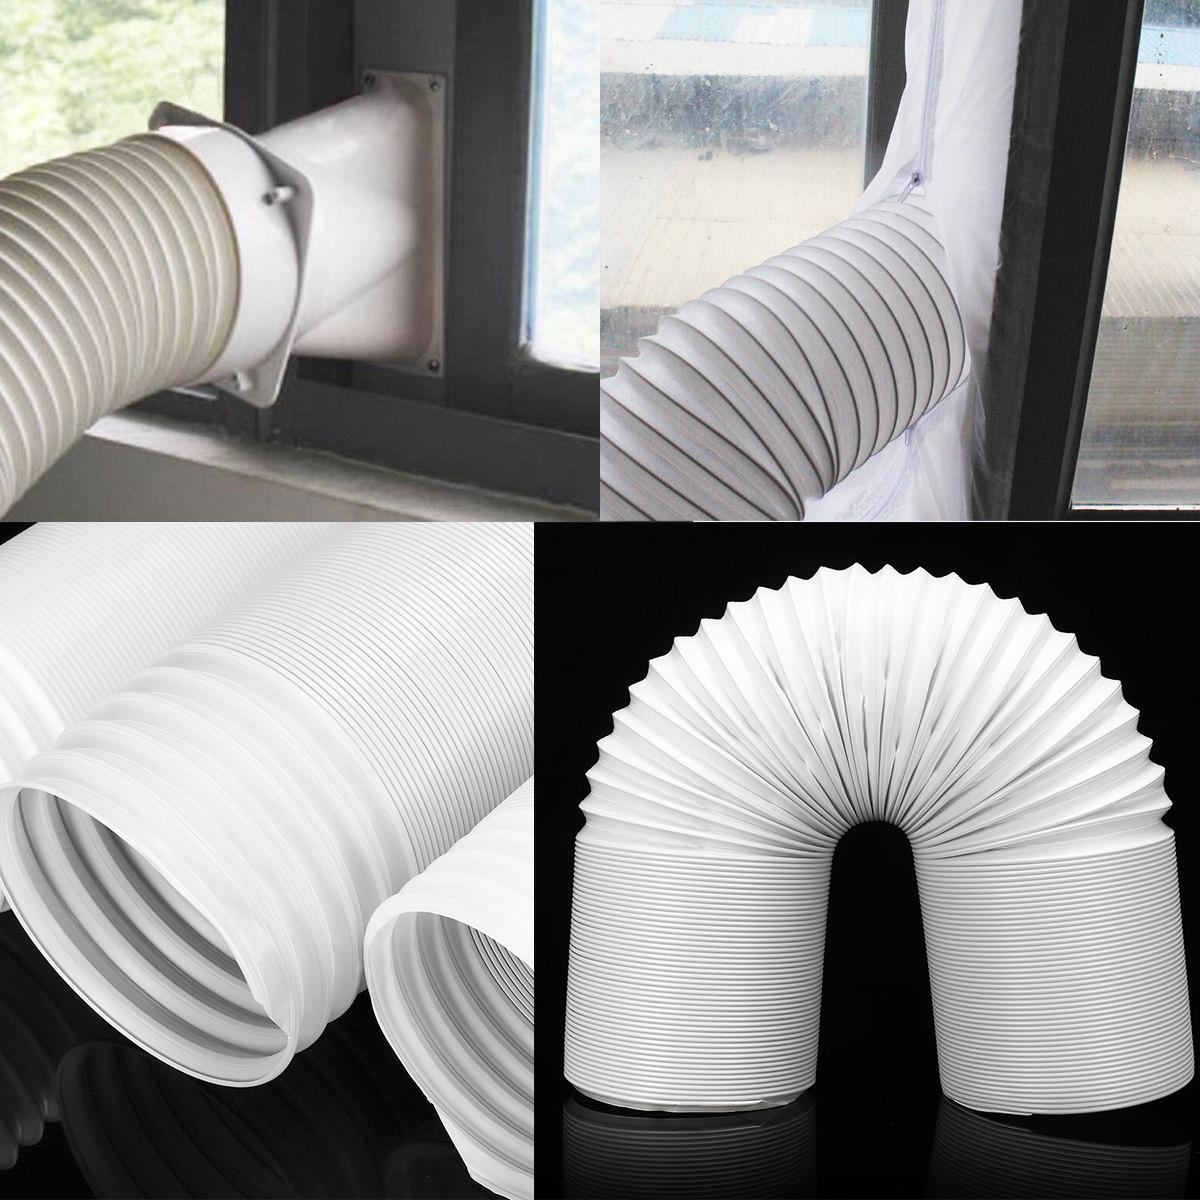 Lg Portable Air Conditioner Vent Hose Duct Assembly Vent Hose Window Kit For Lg Portable A C